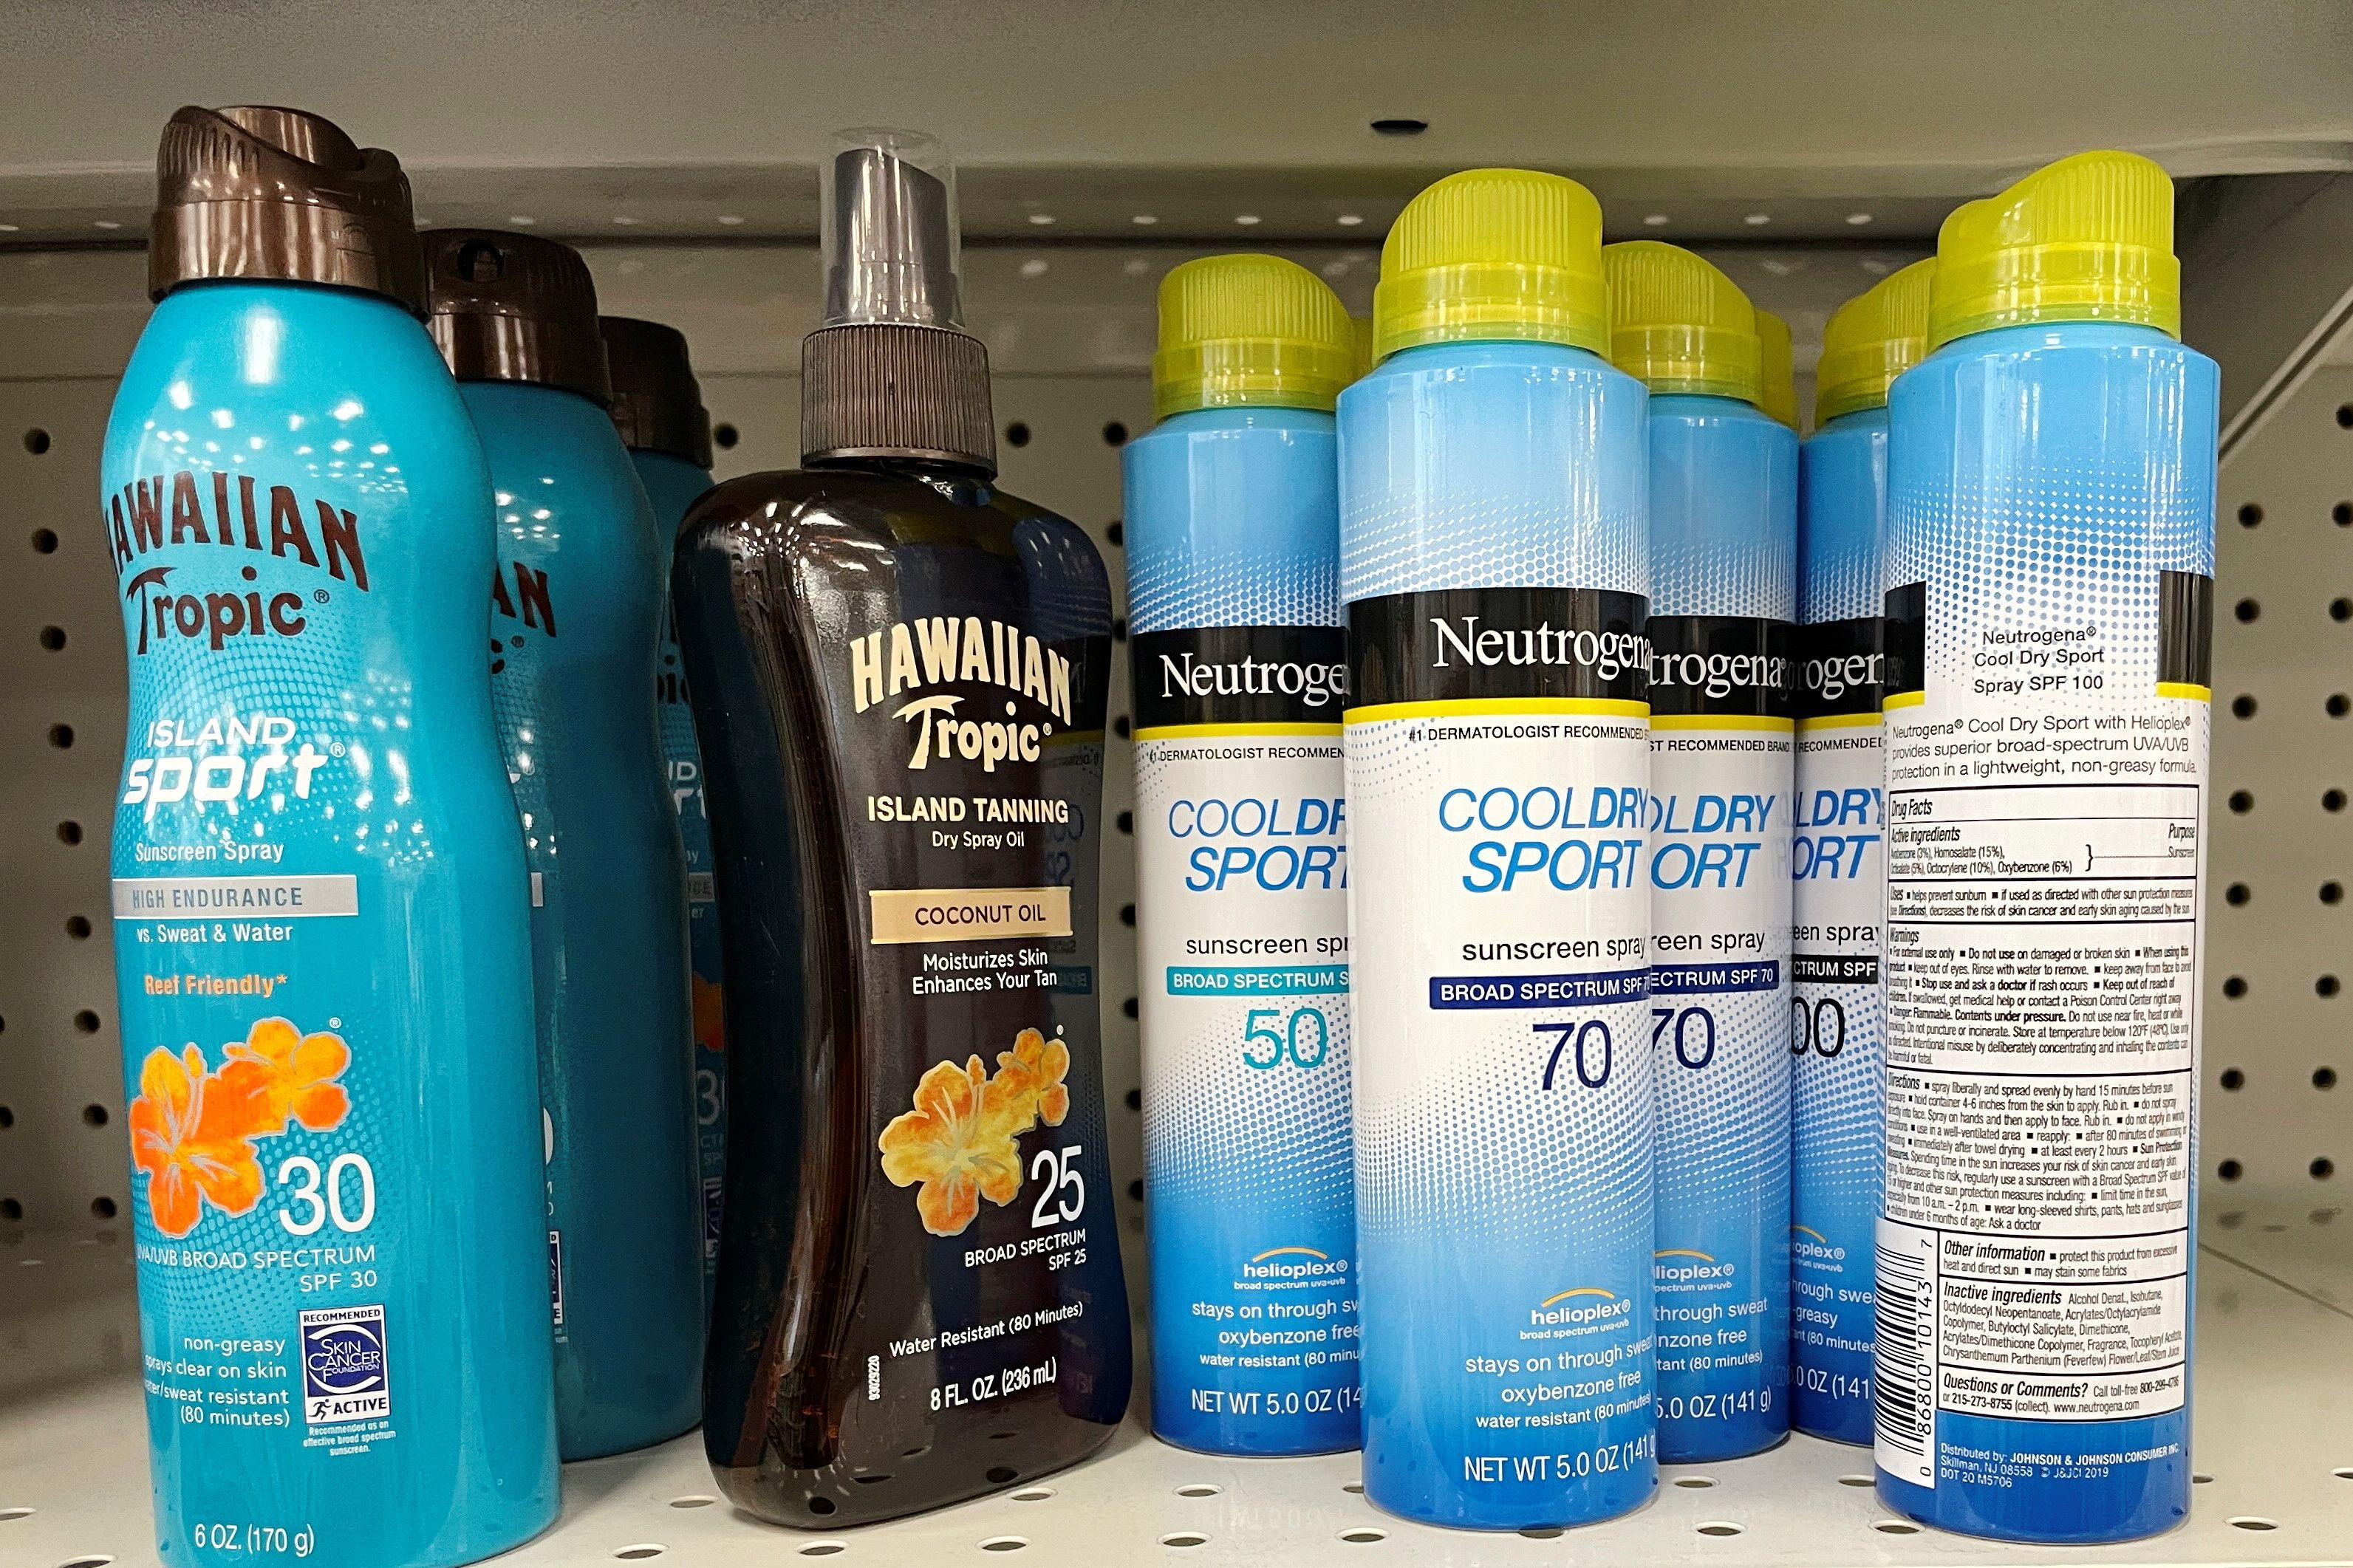 Sunscreens being recalled by Johnson & Johnson sit on a store shelf in Gloucester